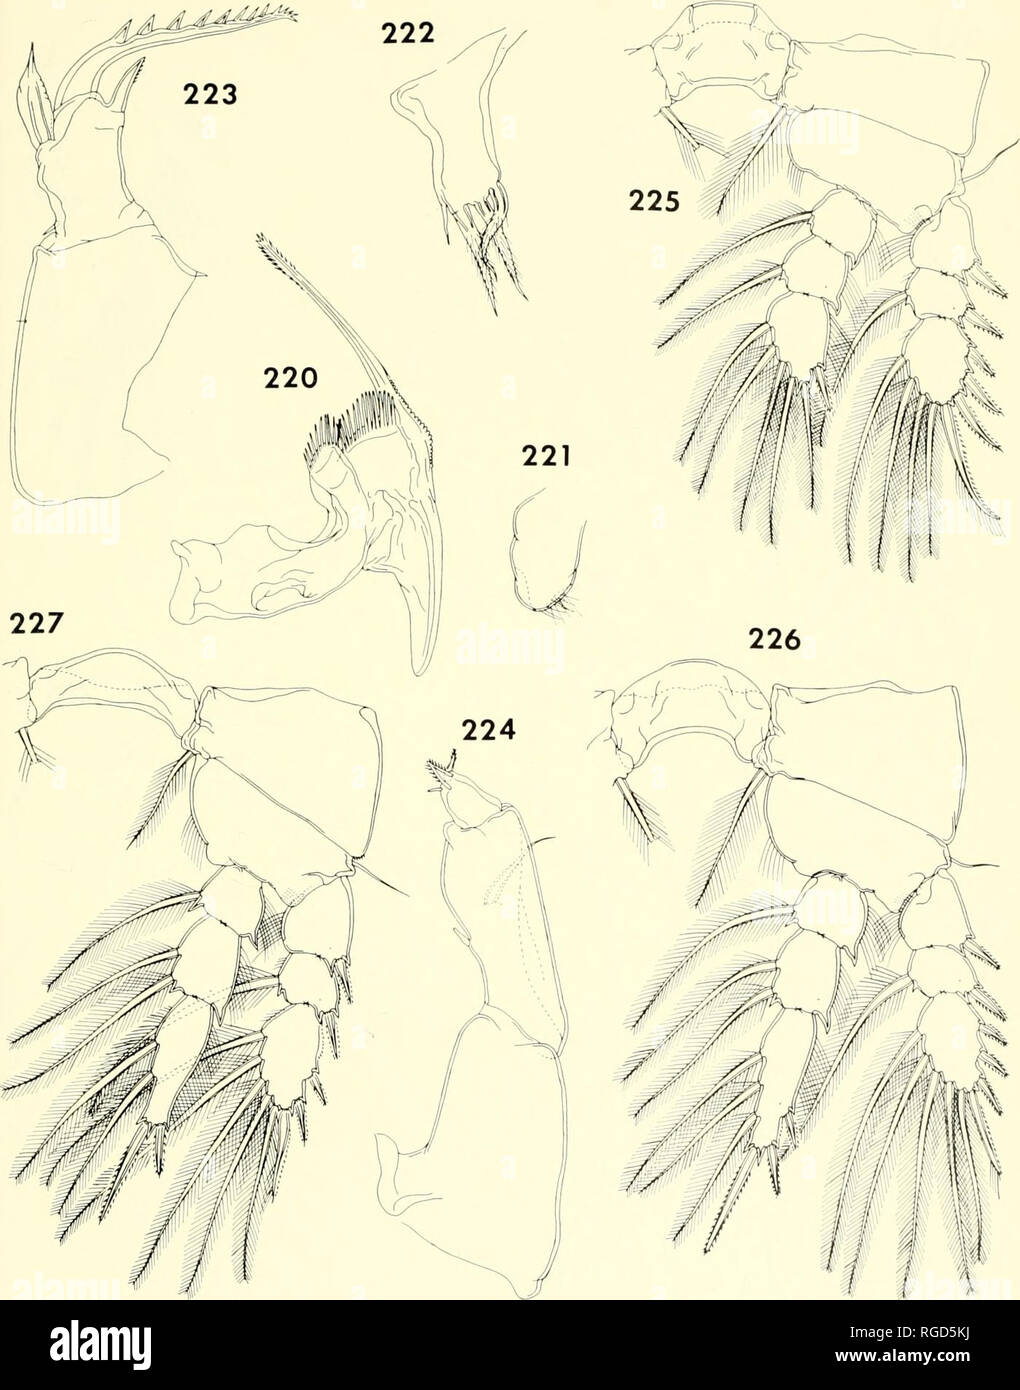 . Bulletin of the Museum of Comparative Zoology at Harvard College. Zoology. CoPEPODS FROM CoRALs IN MADAGASCAR • Humcs and Ho 409. Figures 220-227. Haplomolgus montiporae n. gen., n. sp., female (continued). 220, mandible, posterior (C); 221, par- agnath, posterior (C); 222, first maxilla, posterior (C); 223, second maxilla, posterior (Cj; 224, maxilliped, anterior (C); 225, leg 1 and intercoxal plate, anterior (D); 226, leg 2 and intercoxal plate, anterior (D); 227, leg 3 and intercoxal plate, anterior (D).. Please note that these images are extracted from scanned page images that may have b Stock Photo